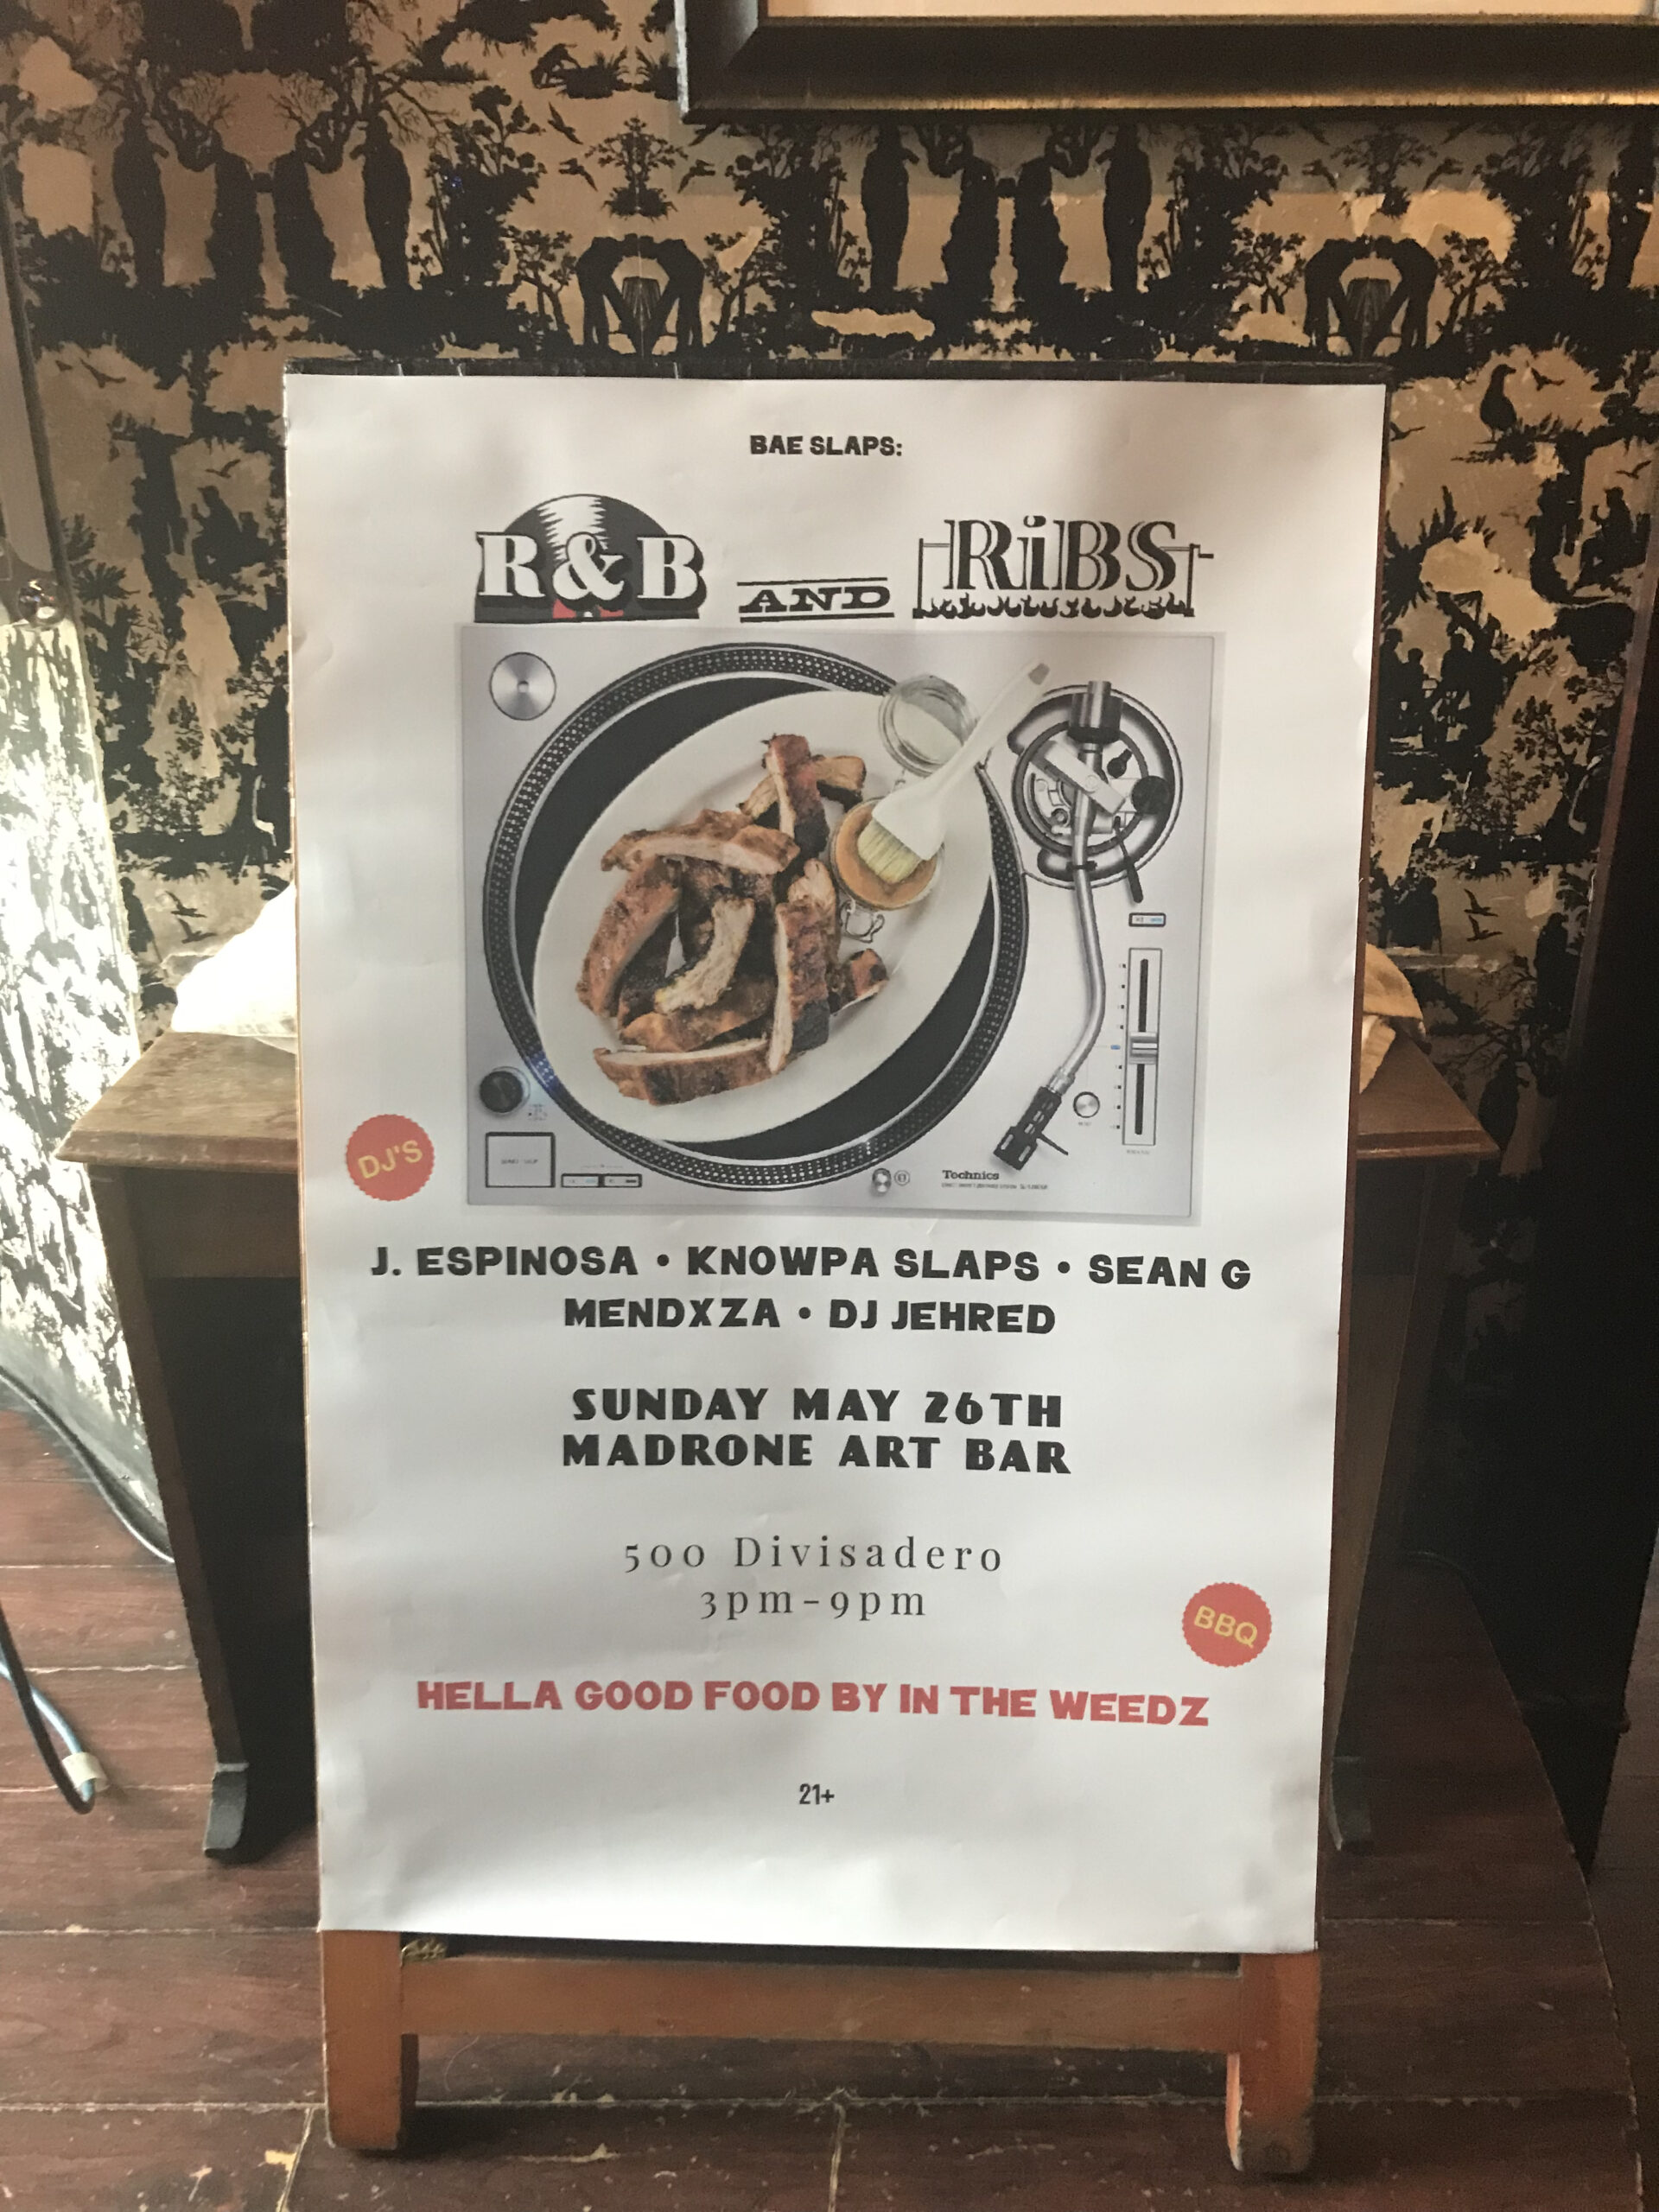 R&B and Ribs banner